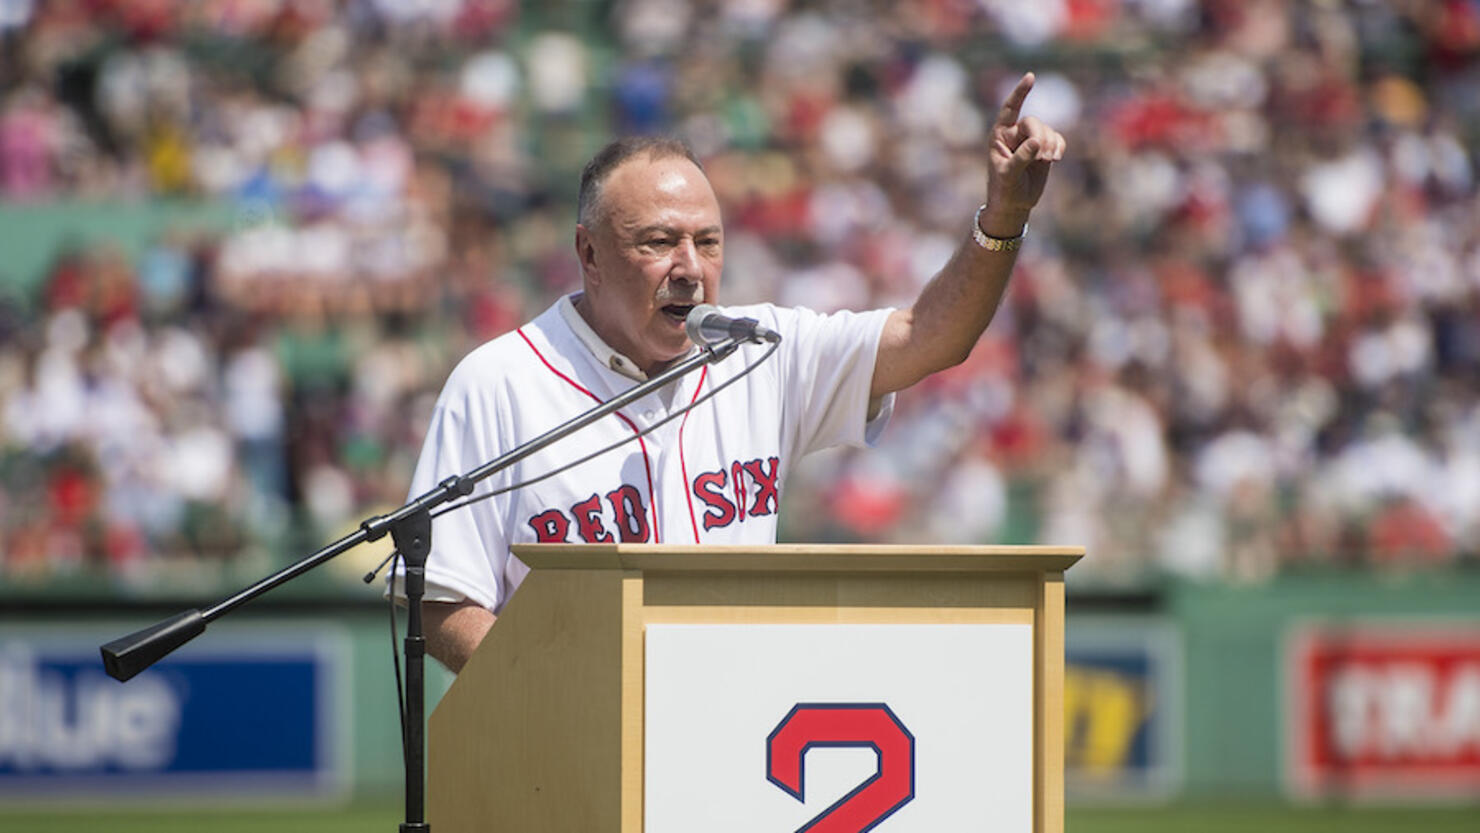 Boston Red Sox to honor late broadcaster Jerry Remy during 2022 season